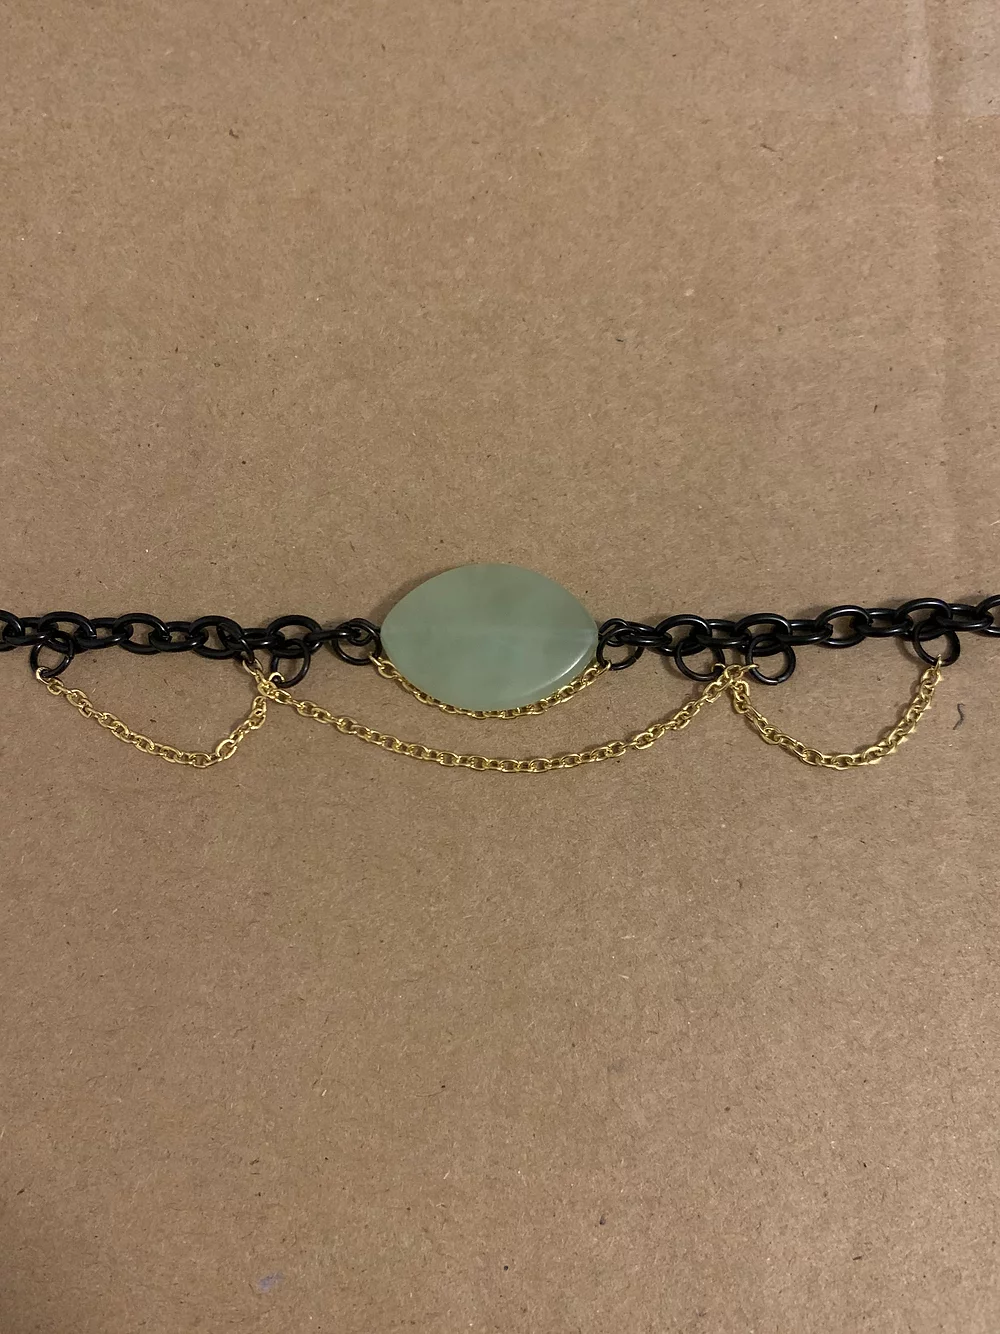 Beaded Bracelet with Gold Chain